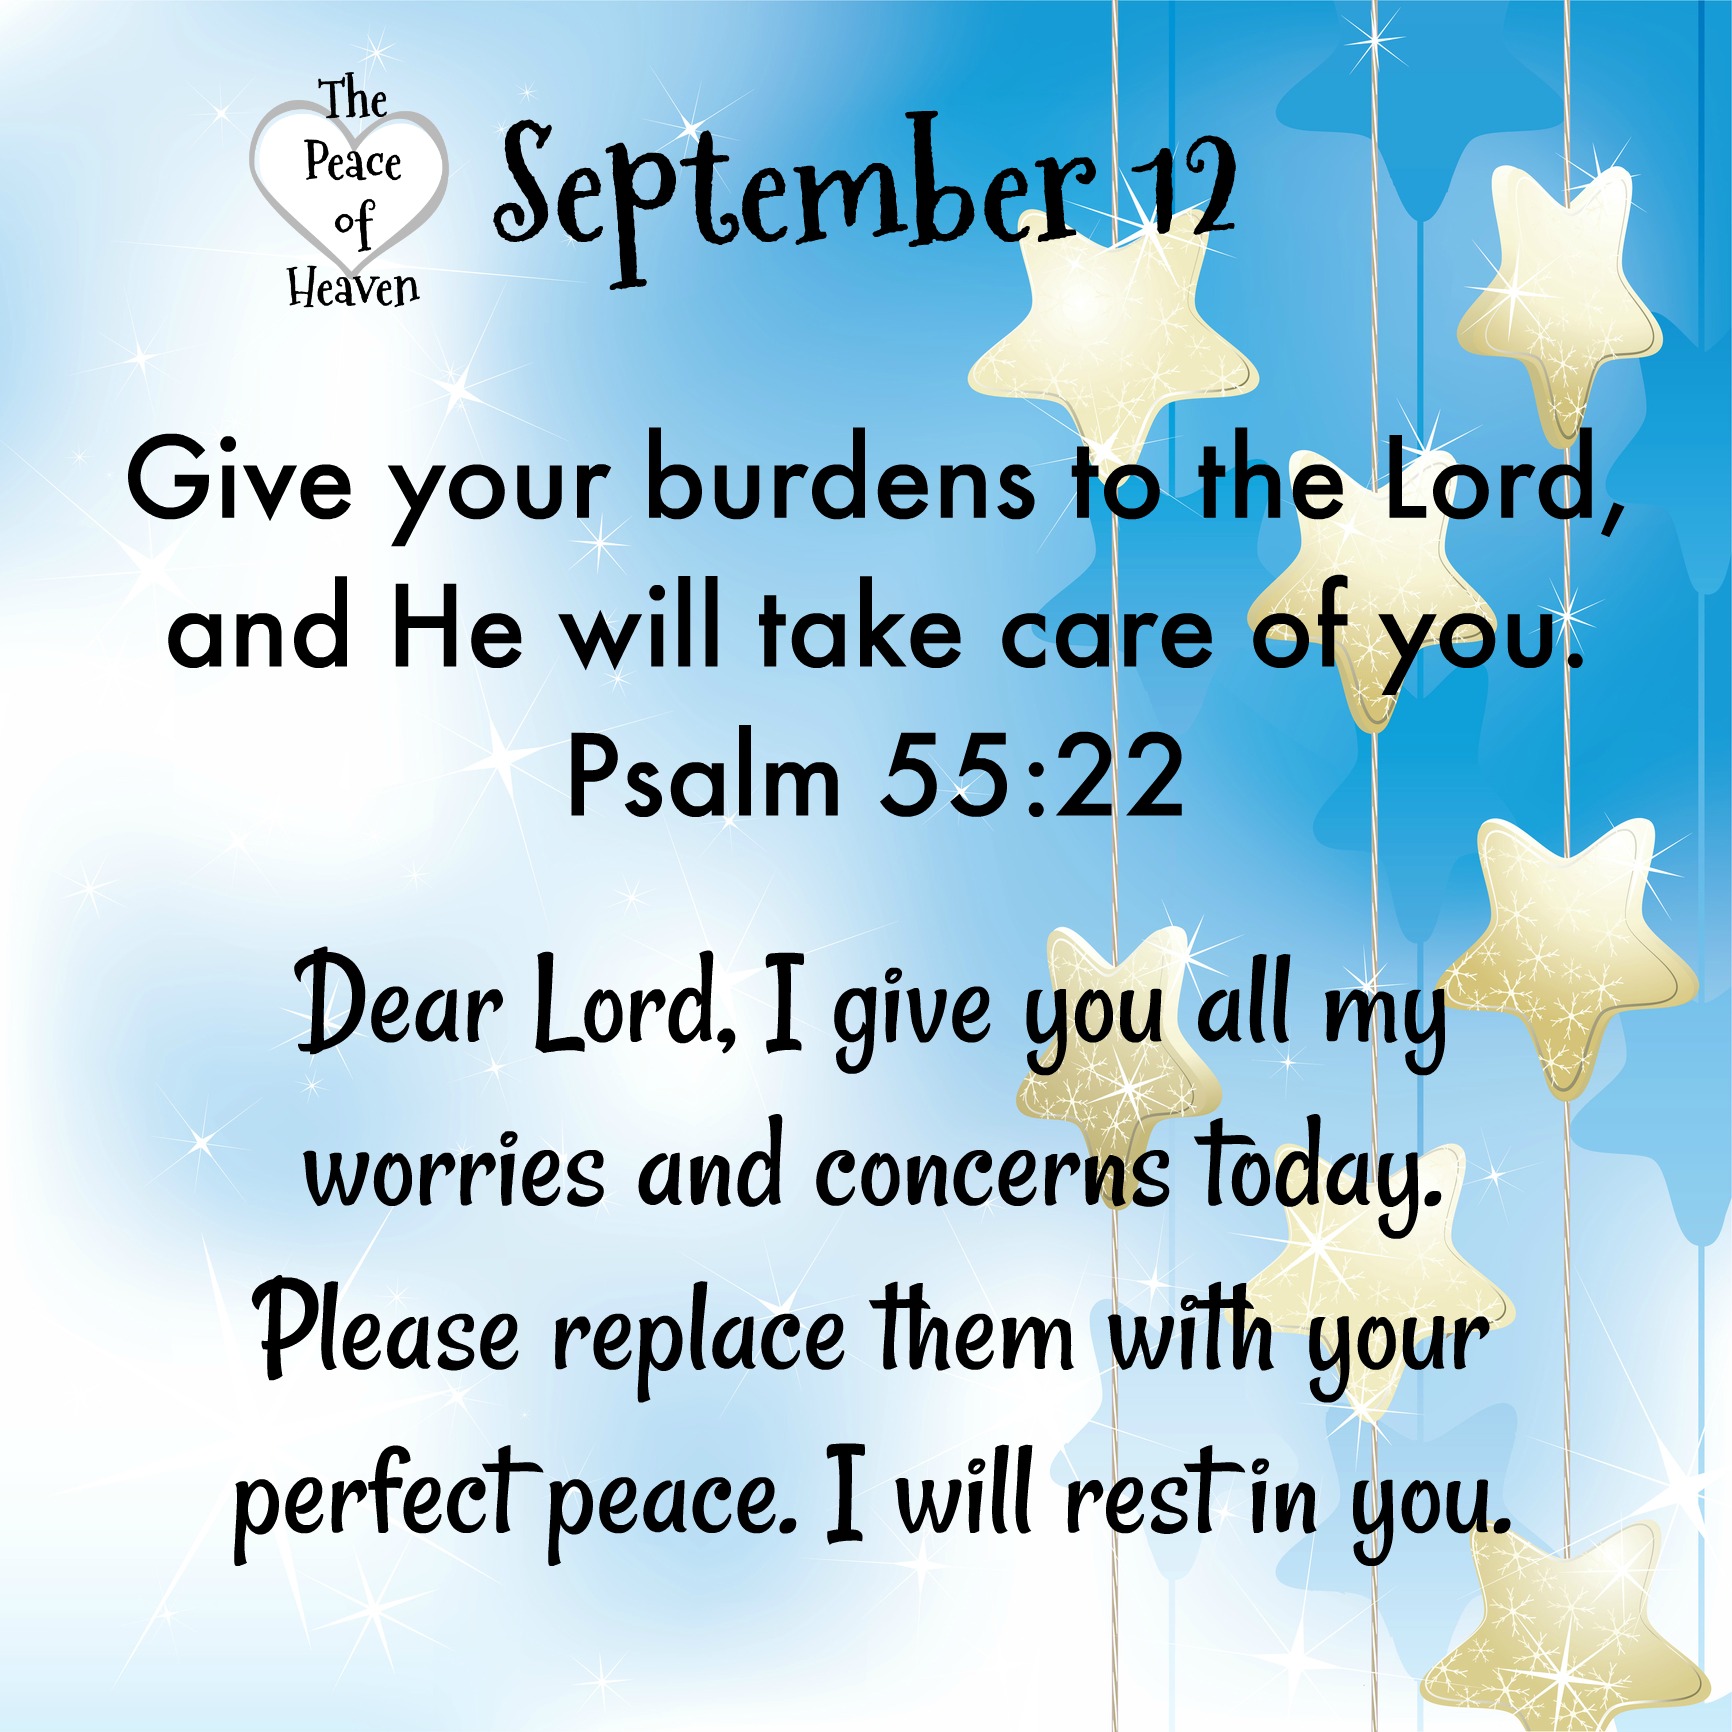 September 12 The Peace of Heaven